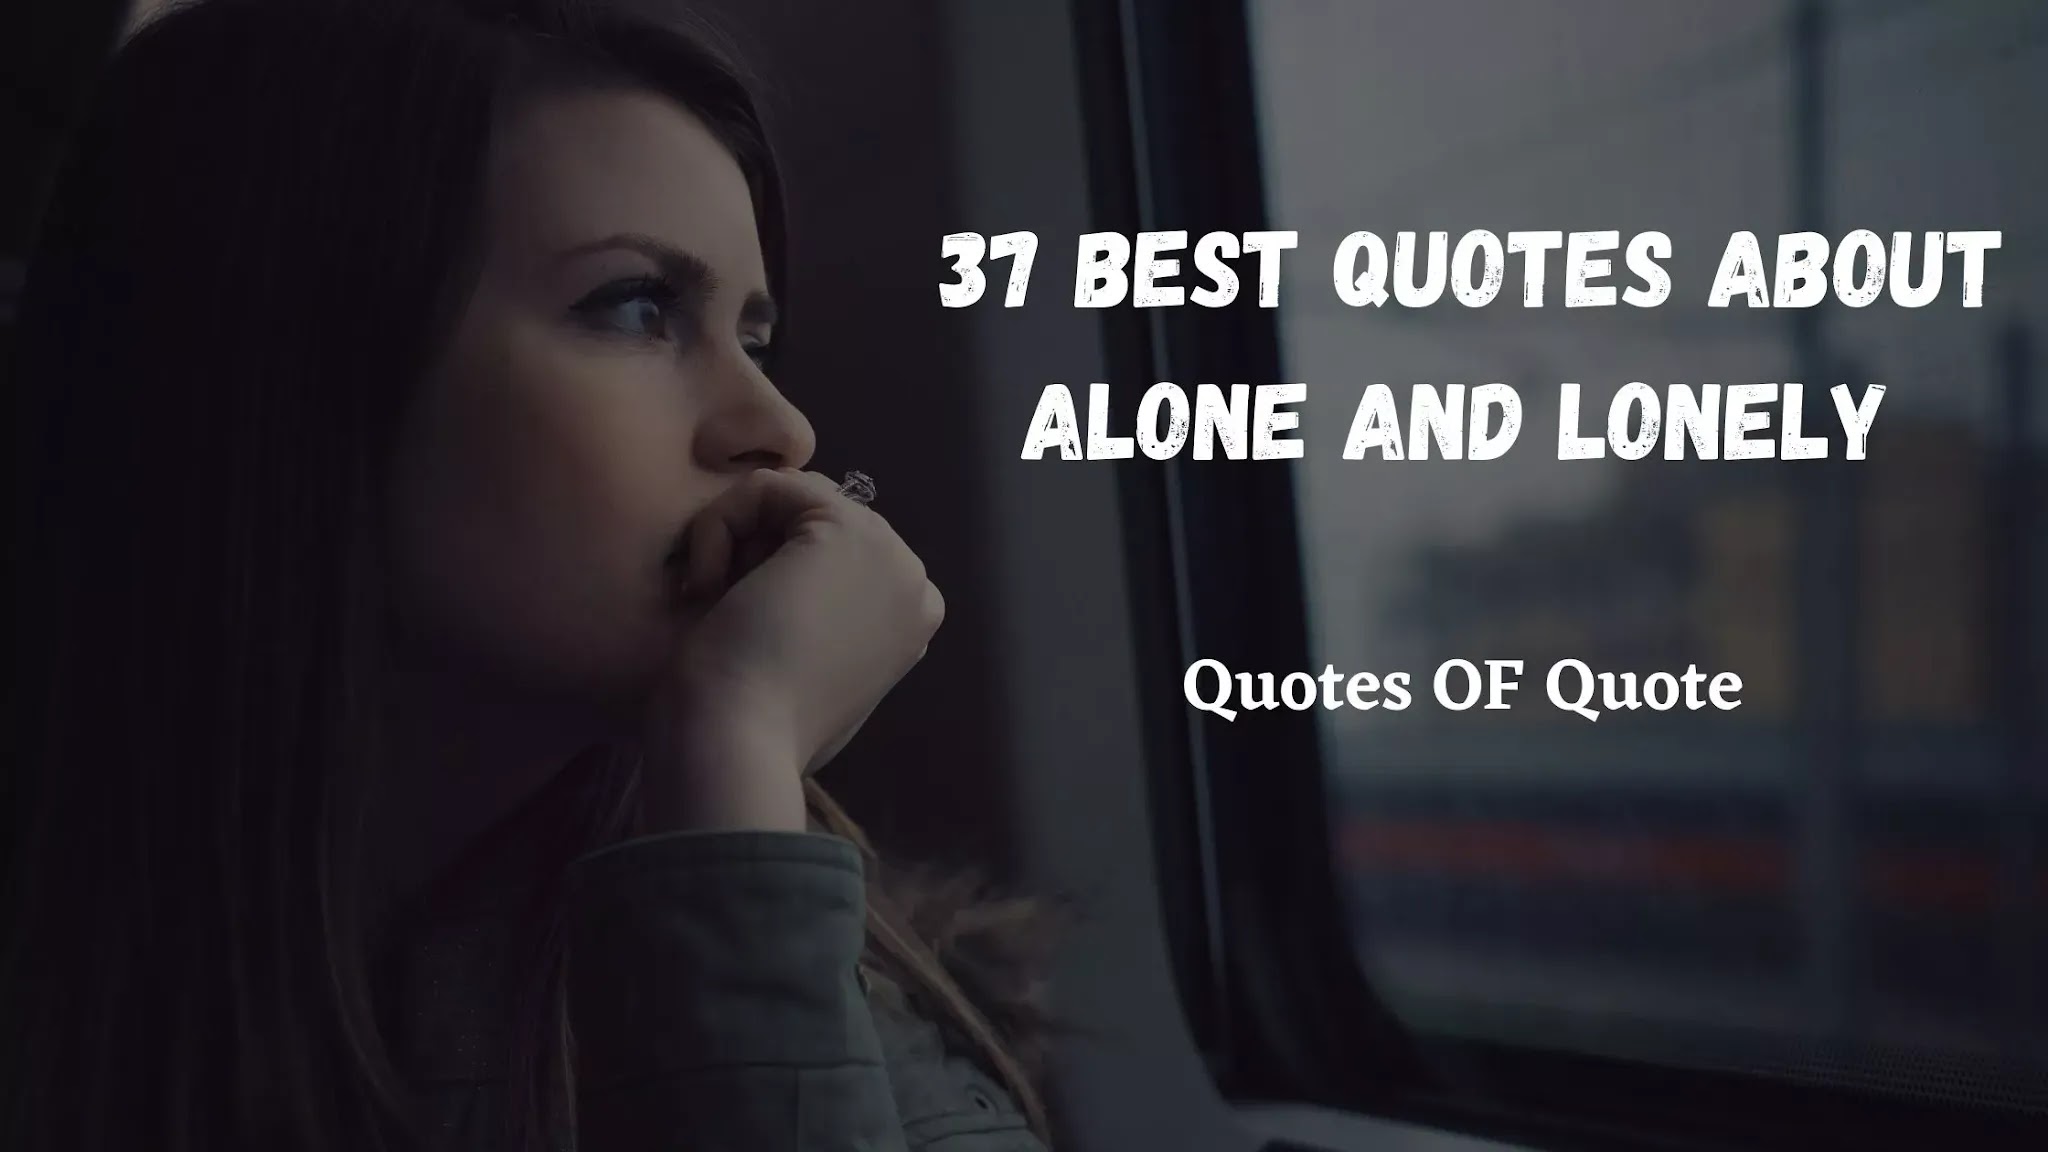 Best Quotes About Alone And Lonely